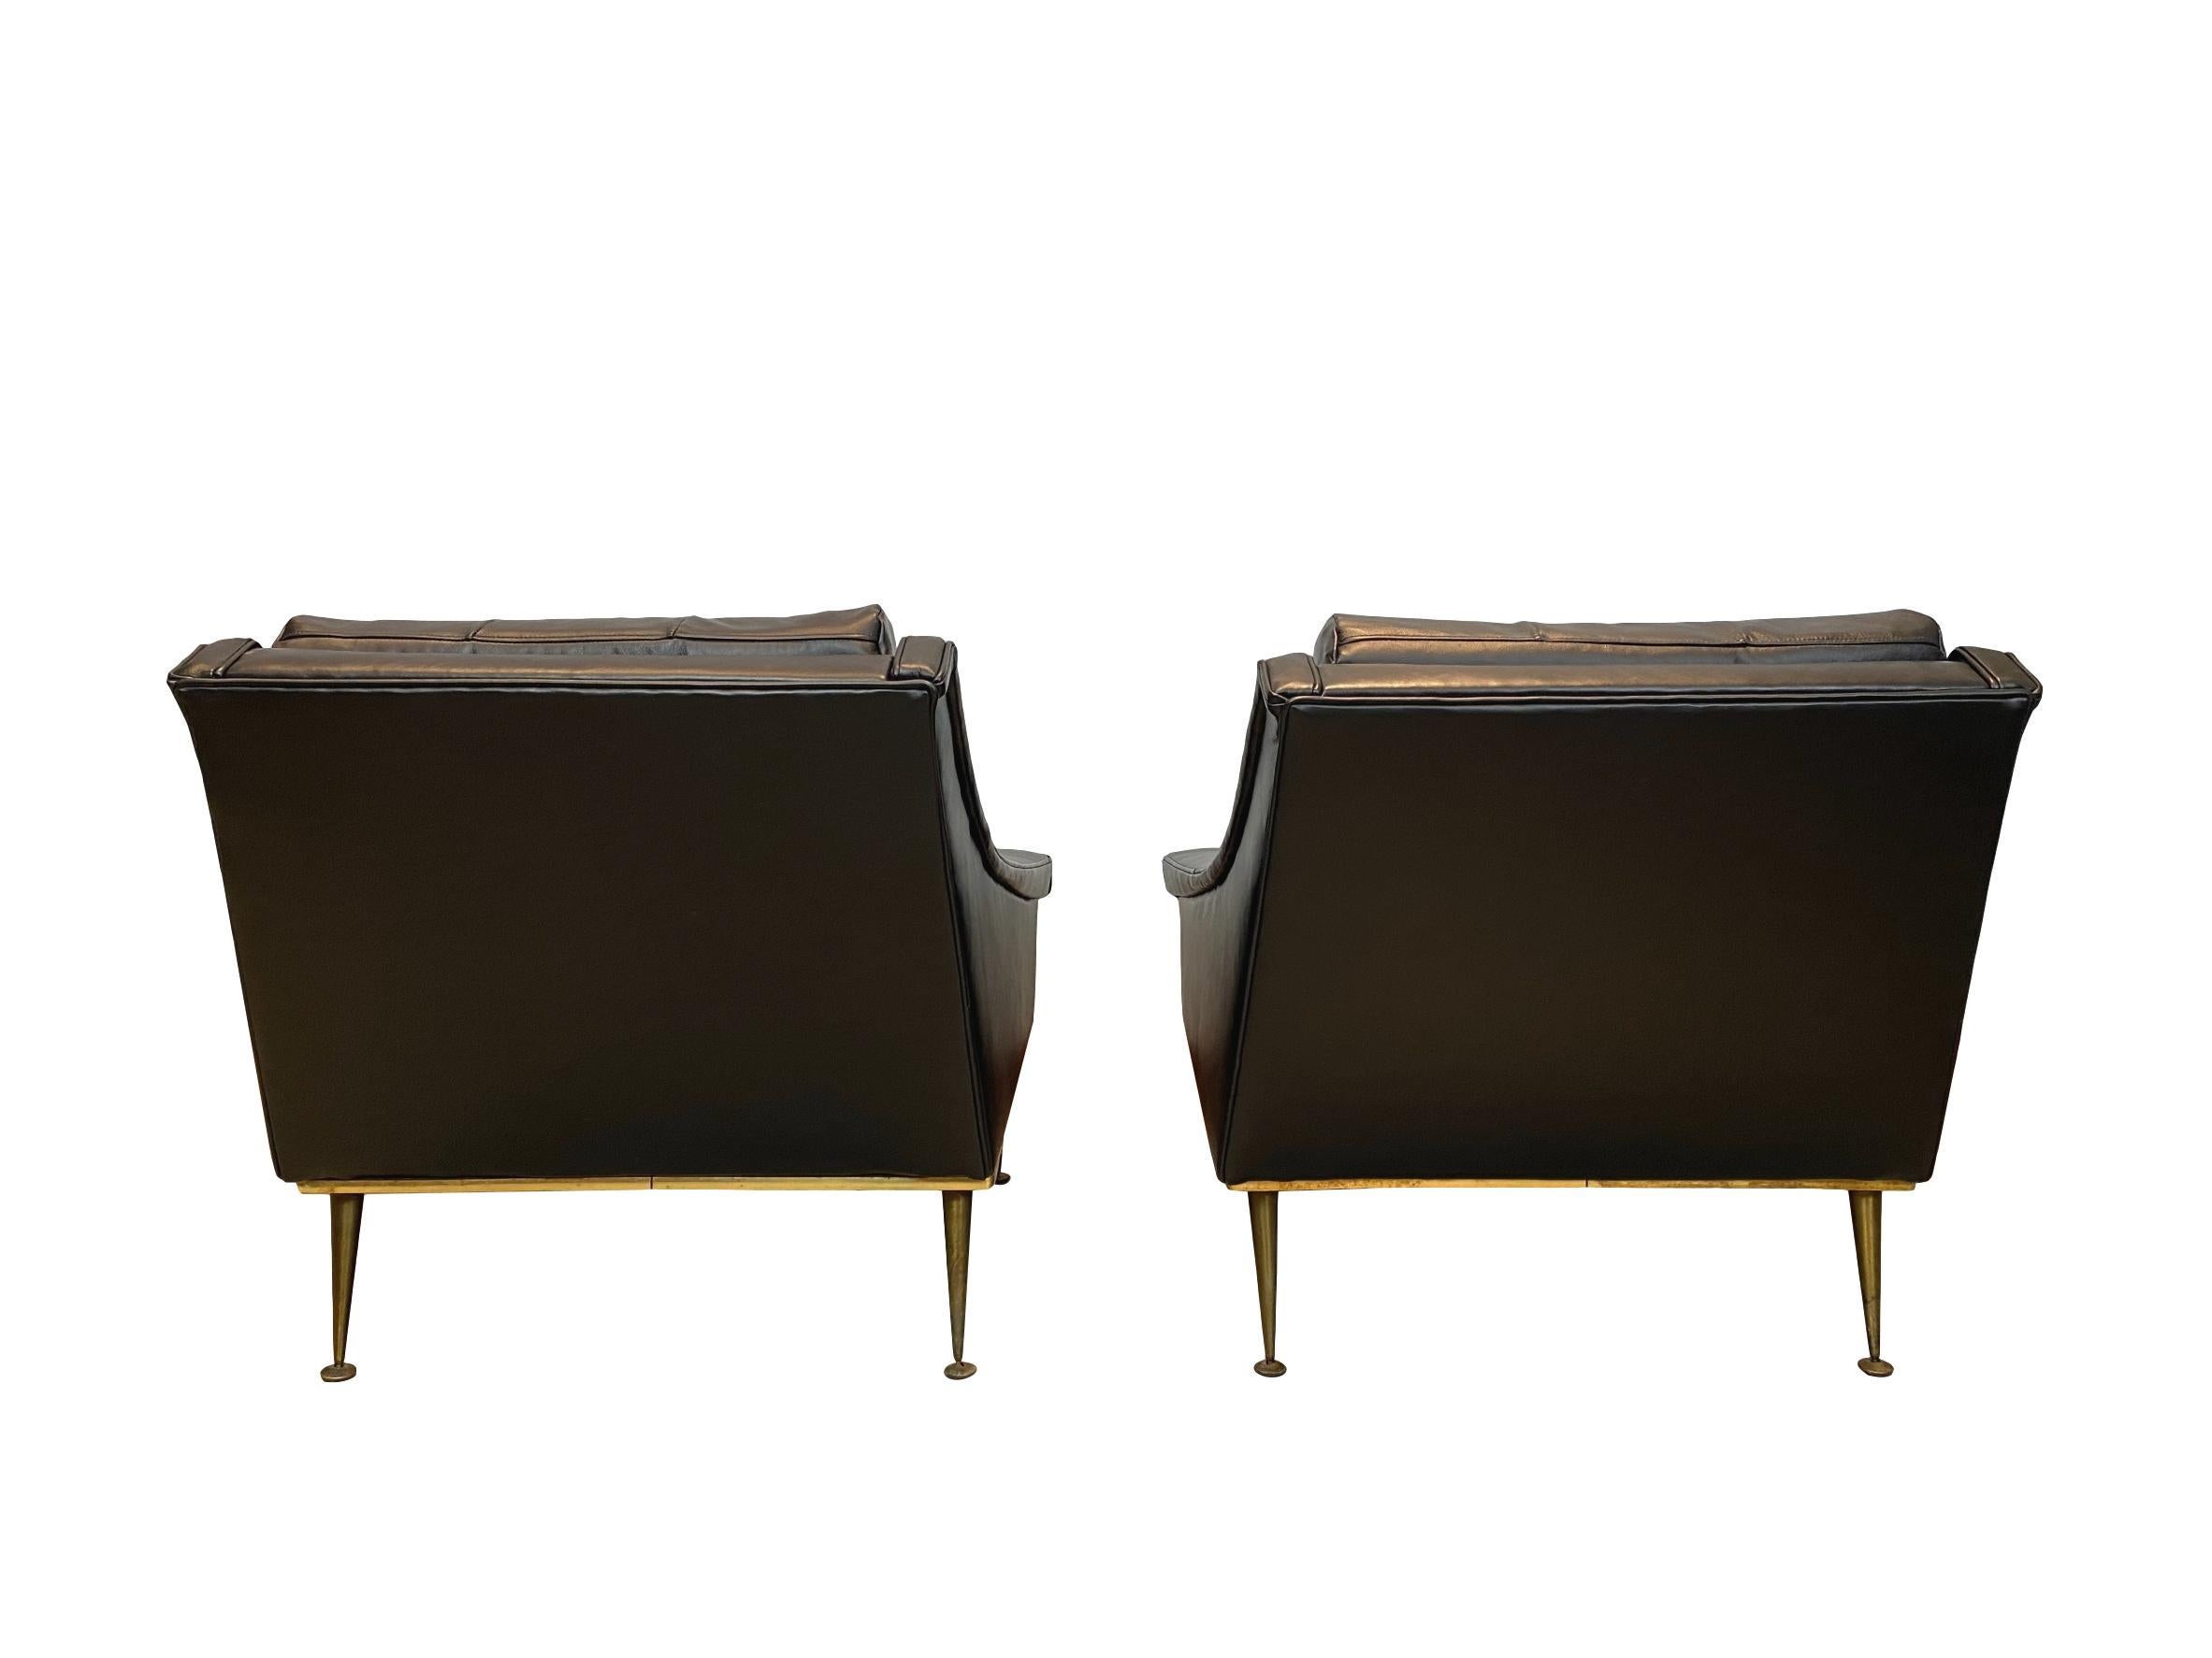 20th Century Mid-Century Modern Lounge Chairs 1960 Newly Upholstered in Italian Leather, Pair